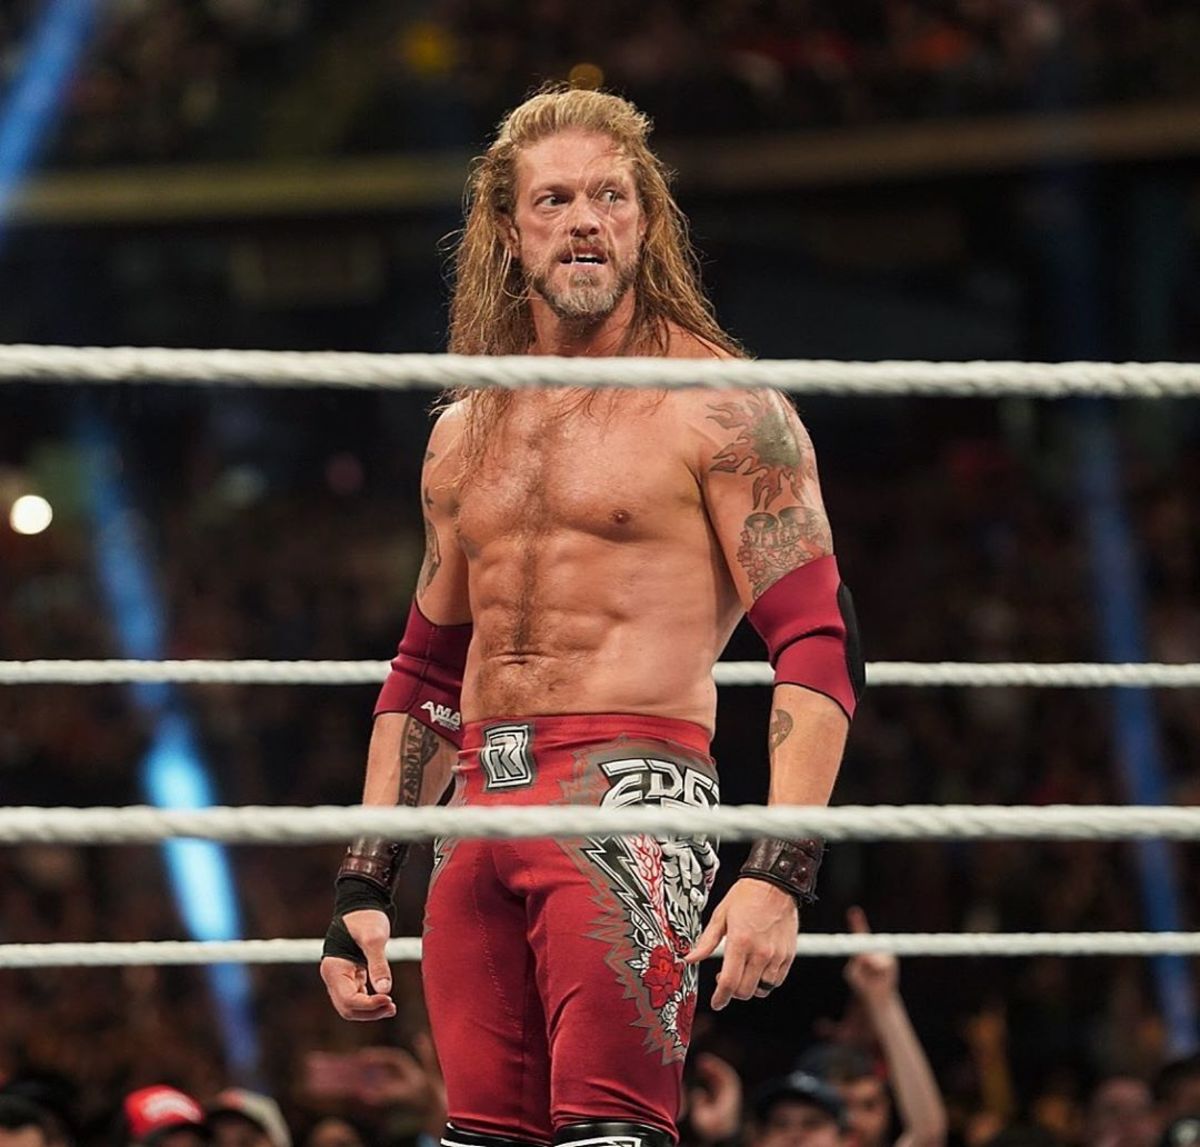 Edge returns to the ring at WWE Royal Rumble.